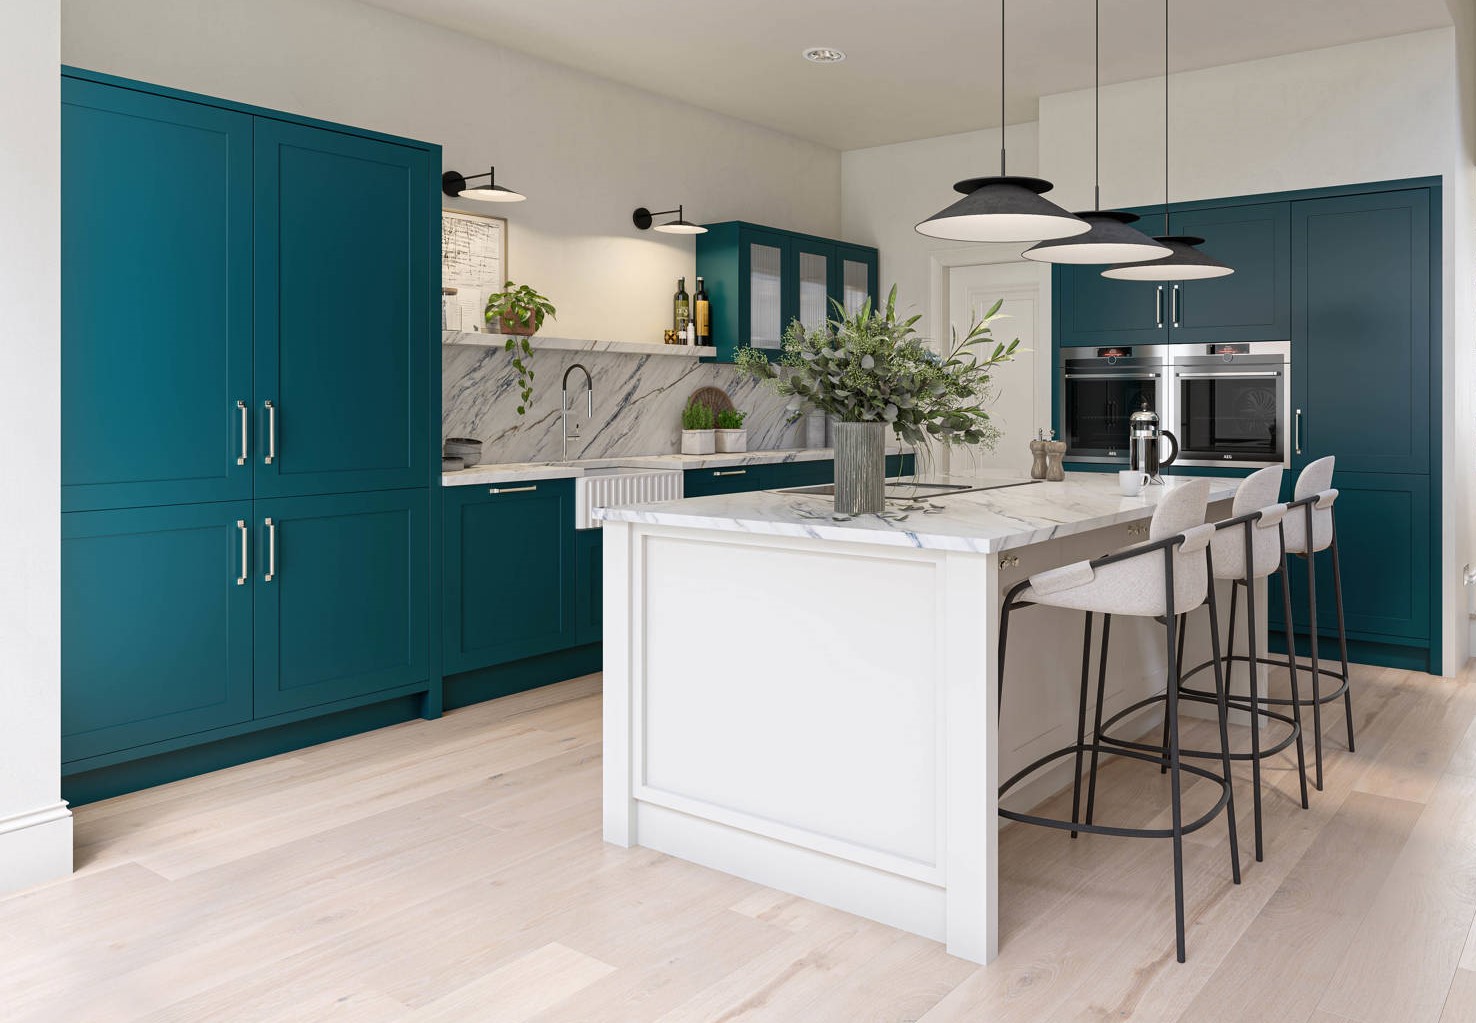 Painted Kitchen Teal